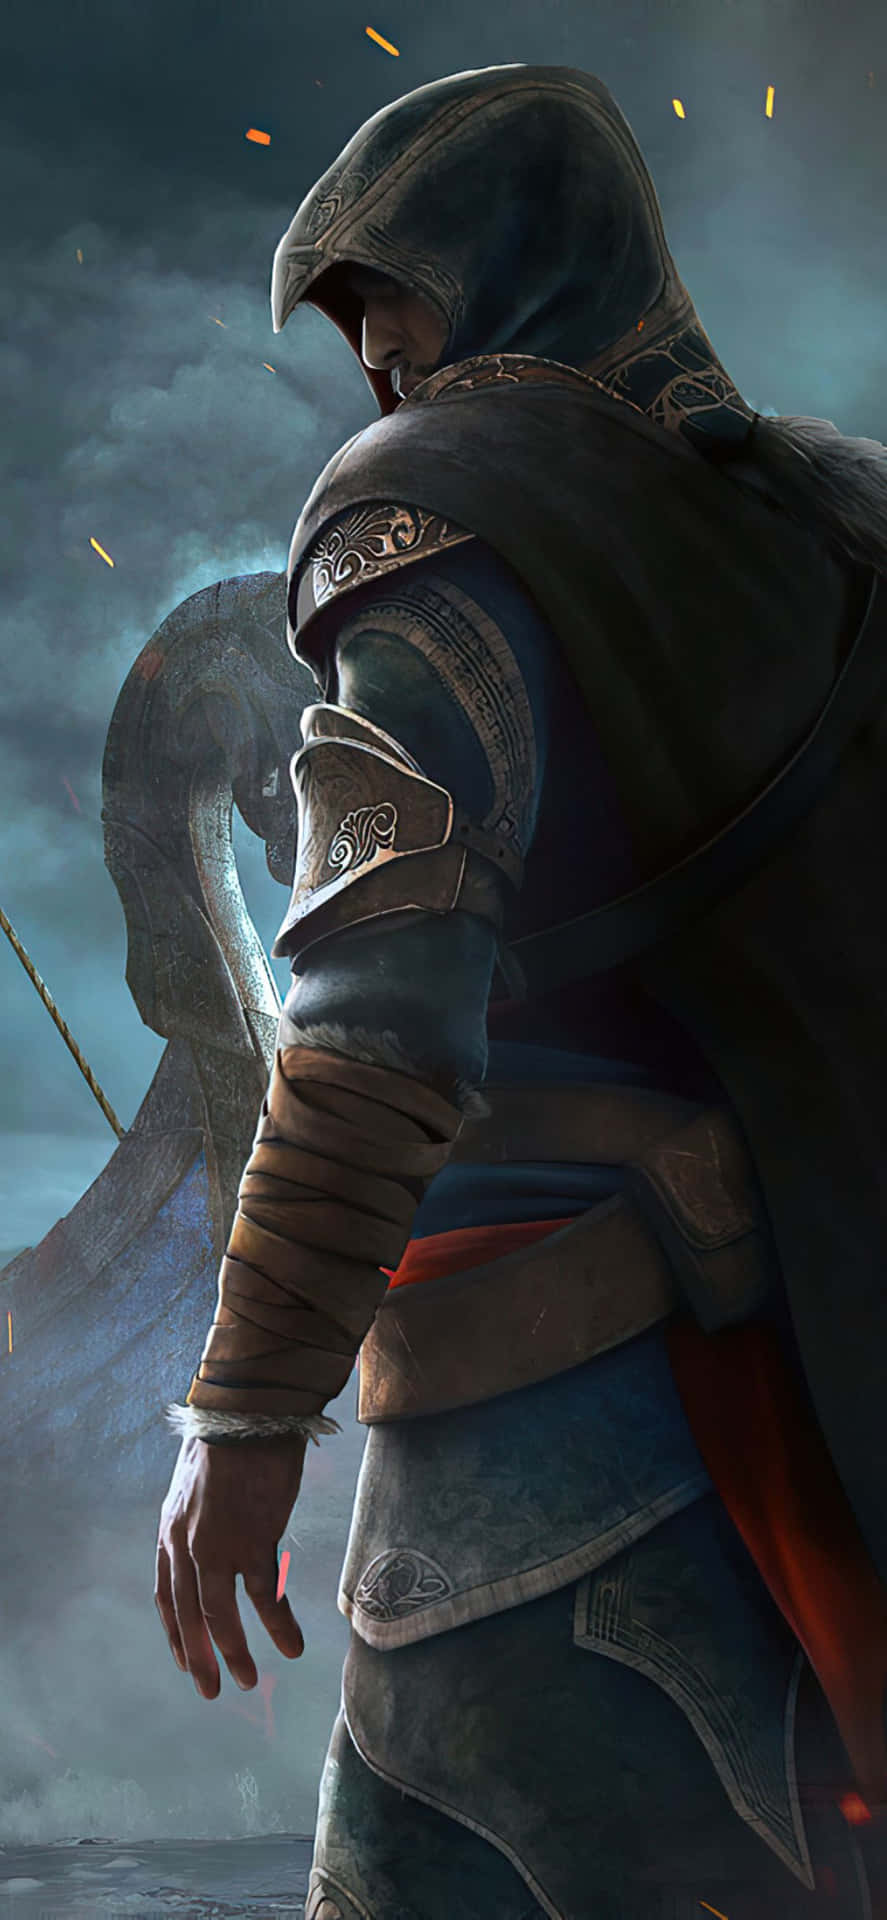 Iphone Xs Assassin's Creed Valhalla Hooded Assassin Background